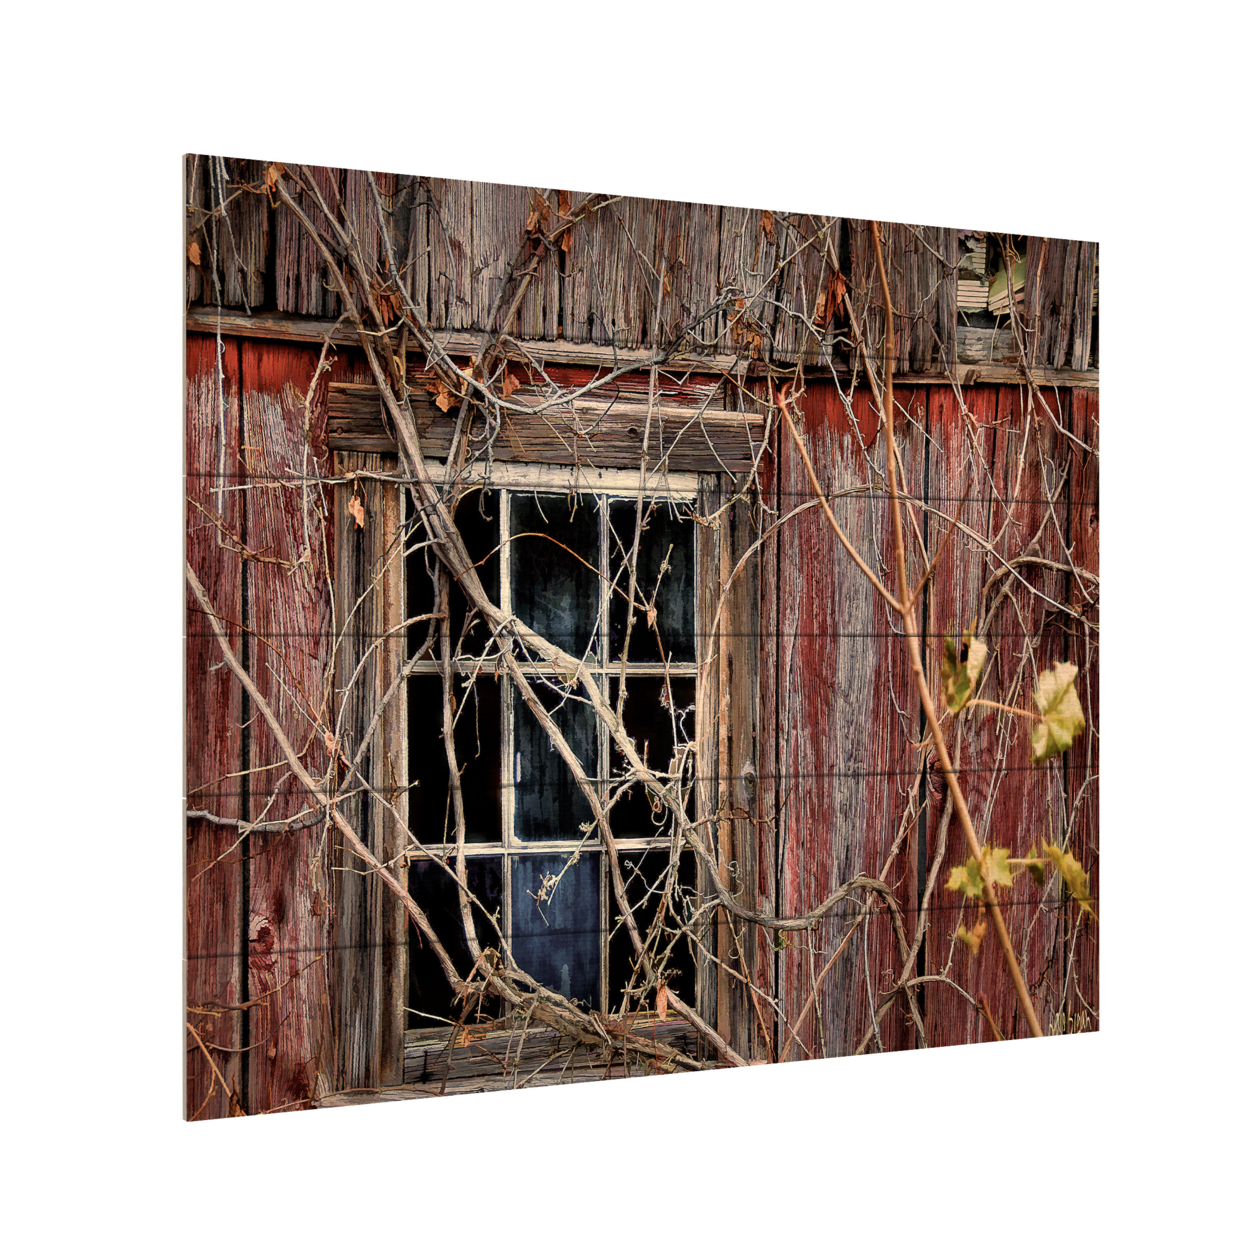 Wooden Slat Art 18 X 22 Inches Titled Old Barn Window Ready To Hang Home Decor Picture